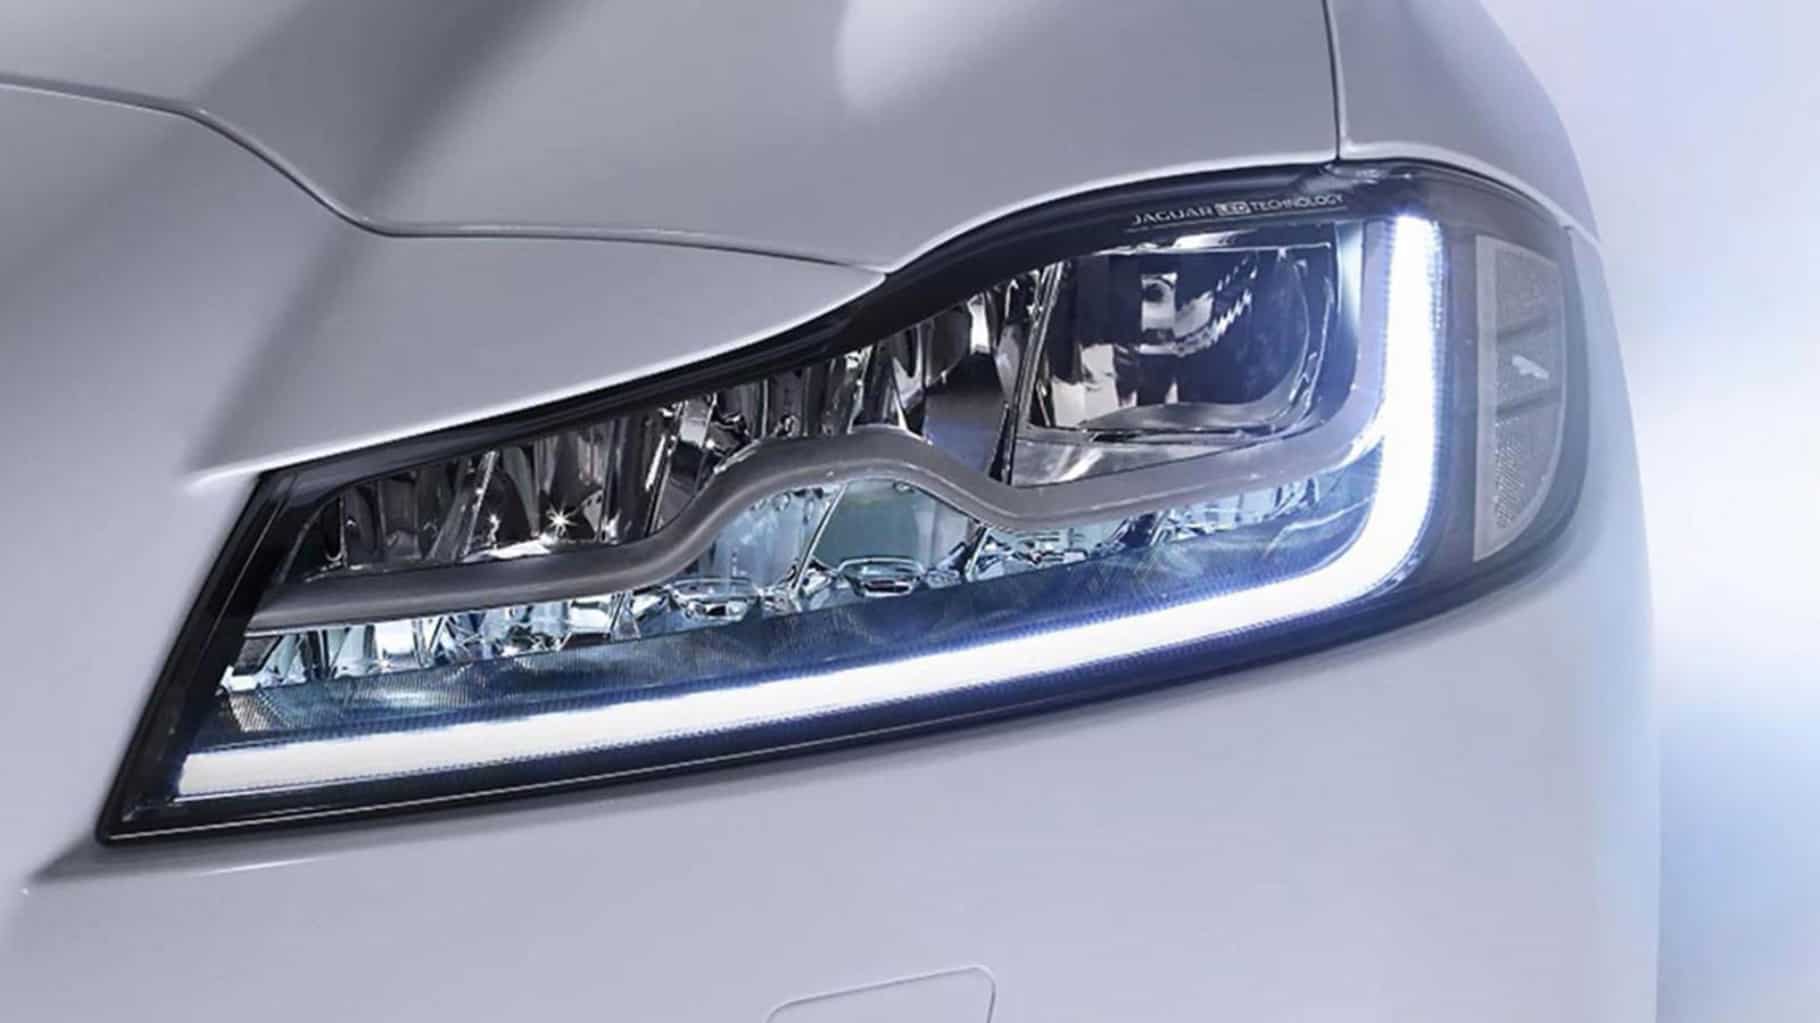 Automatic Headlamps and Intelligent High Beam Assist